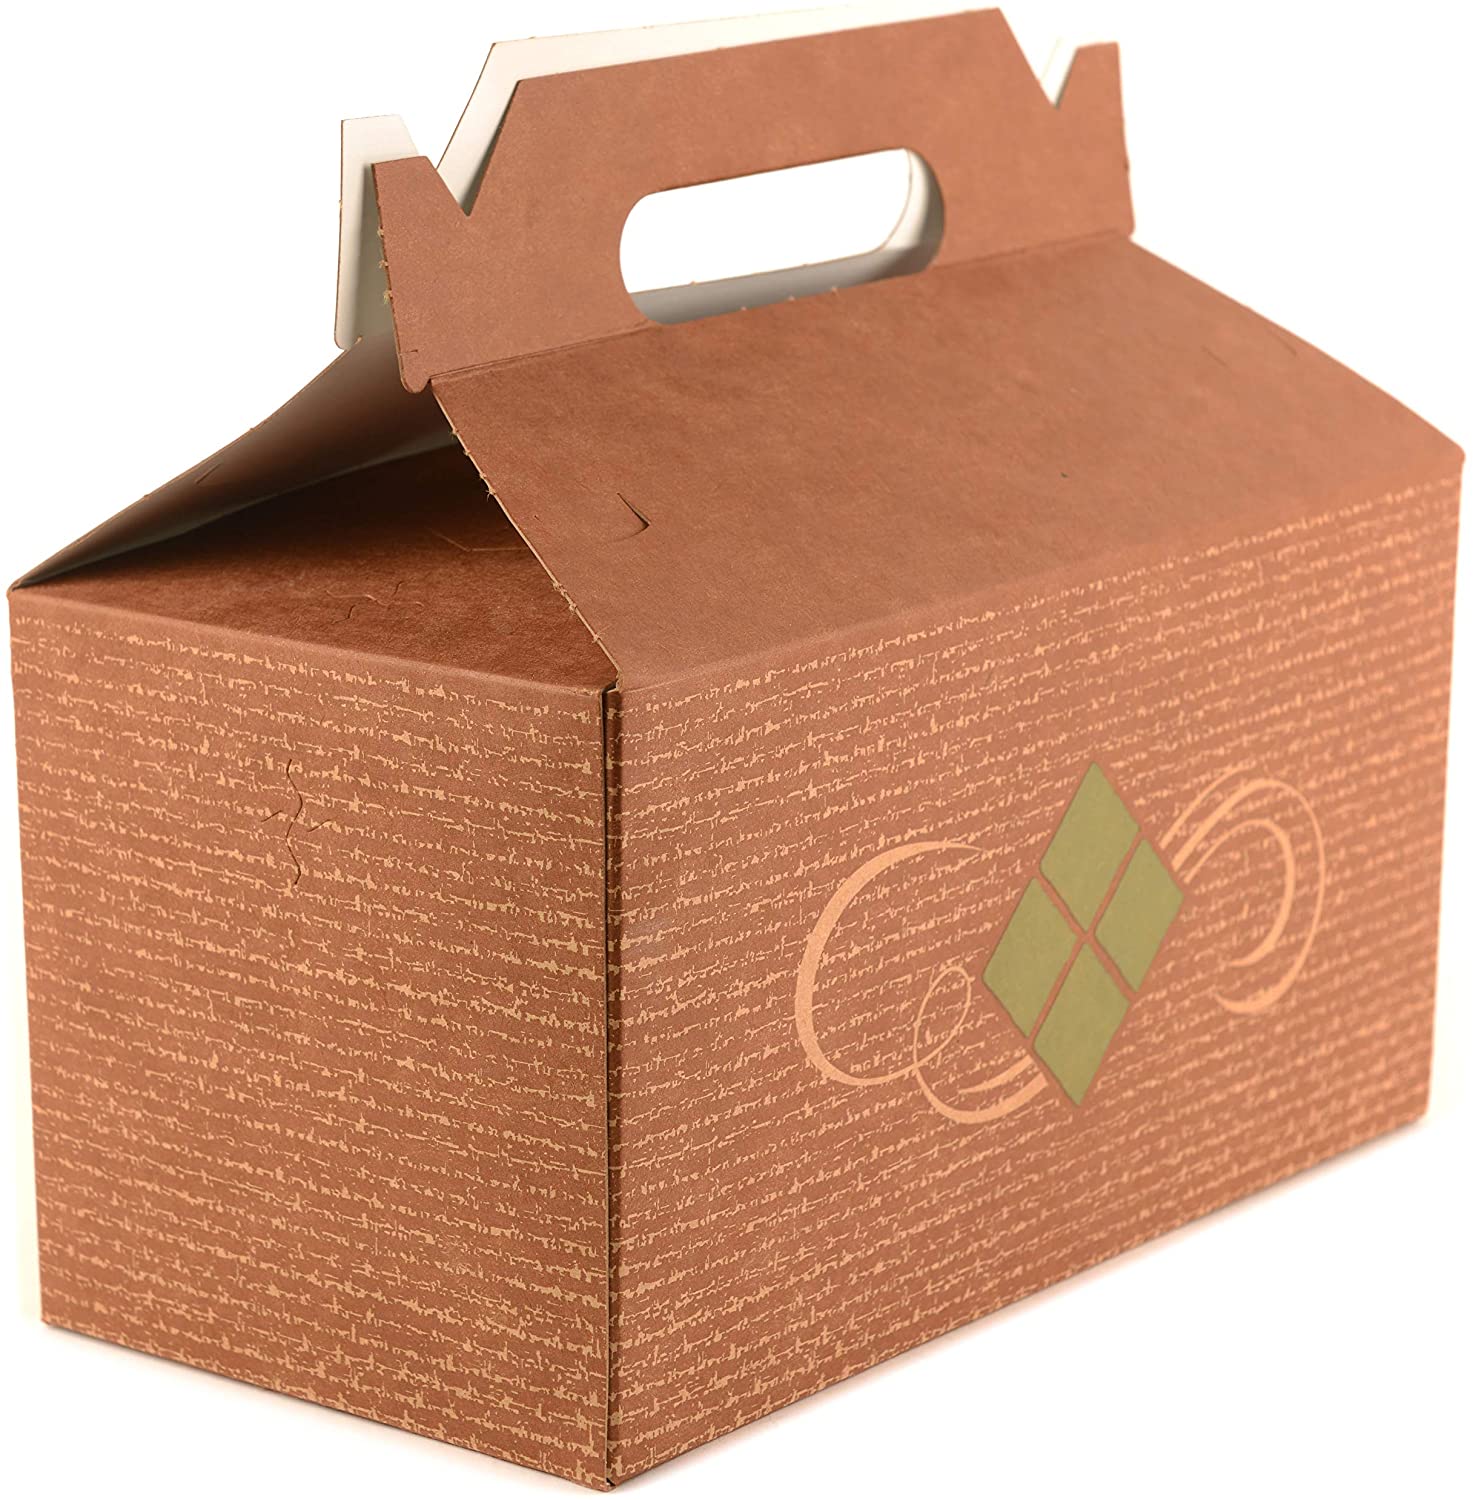 arts and crafts projects  Restaurant supplies  Paper Lunch Boxes  Paper Containers  Gift Boxes  Food Take Out Containers  Food Container  diy party favors  Brown Boxes  Box with Handles  affordable bulk economical commercial wholesale nyc ecoquality